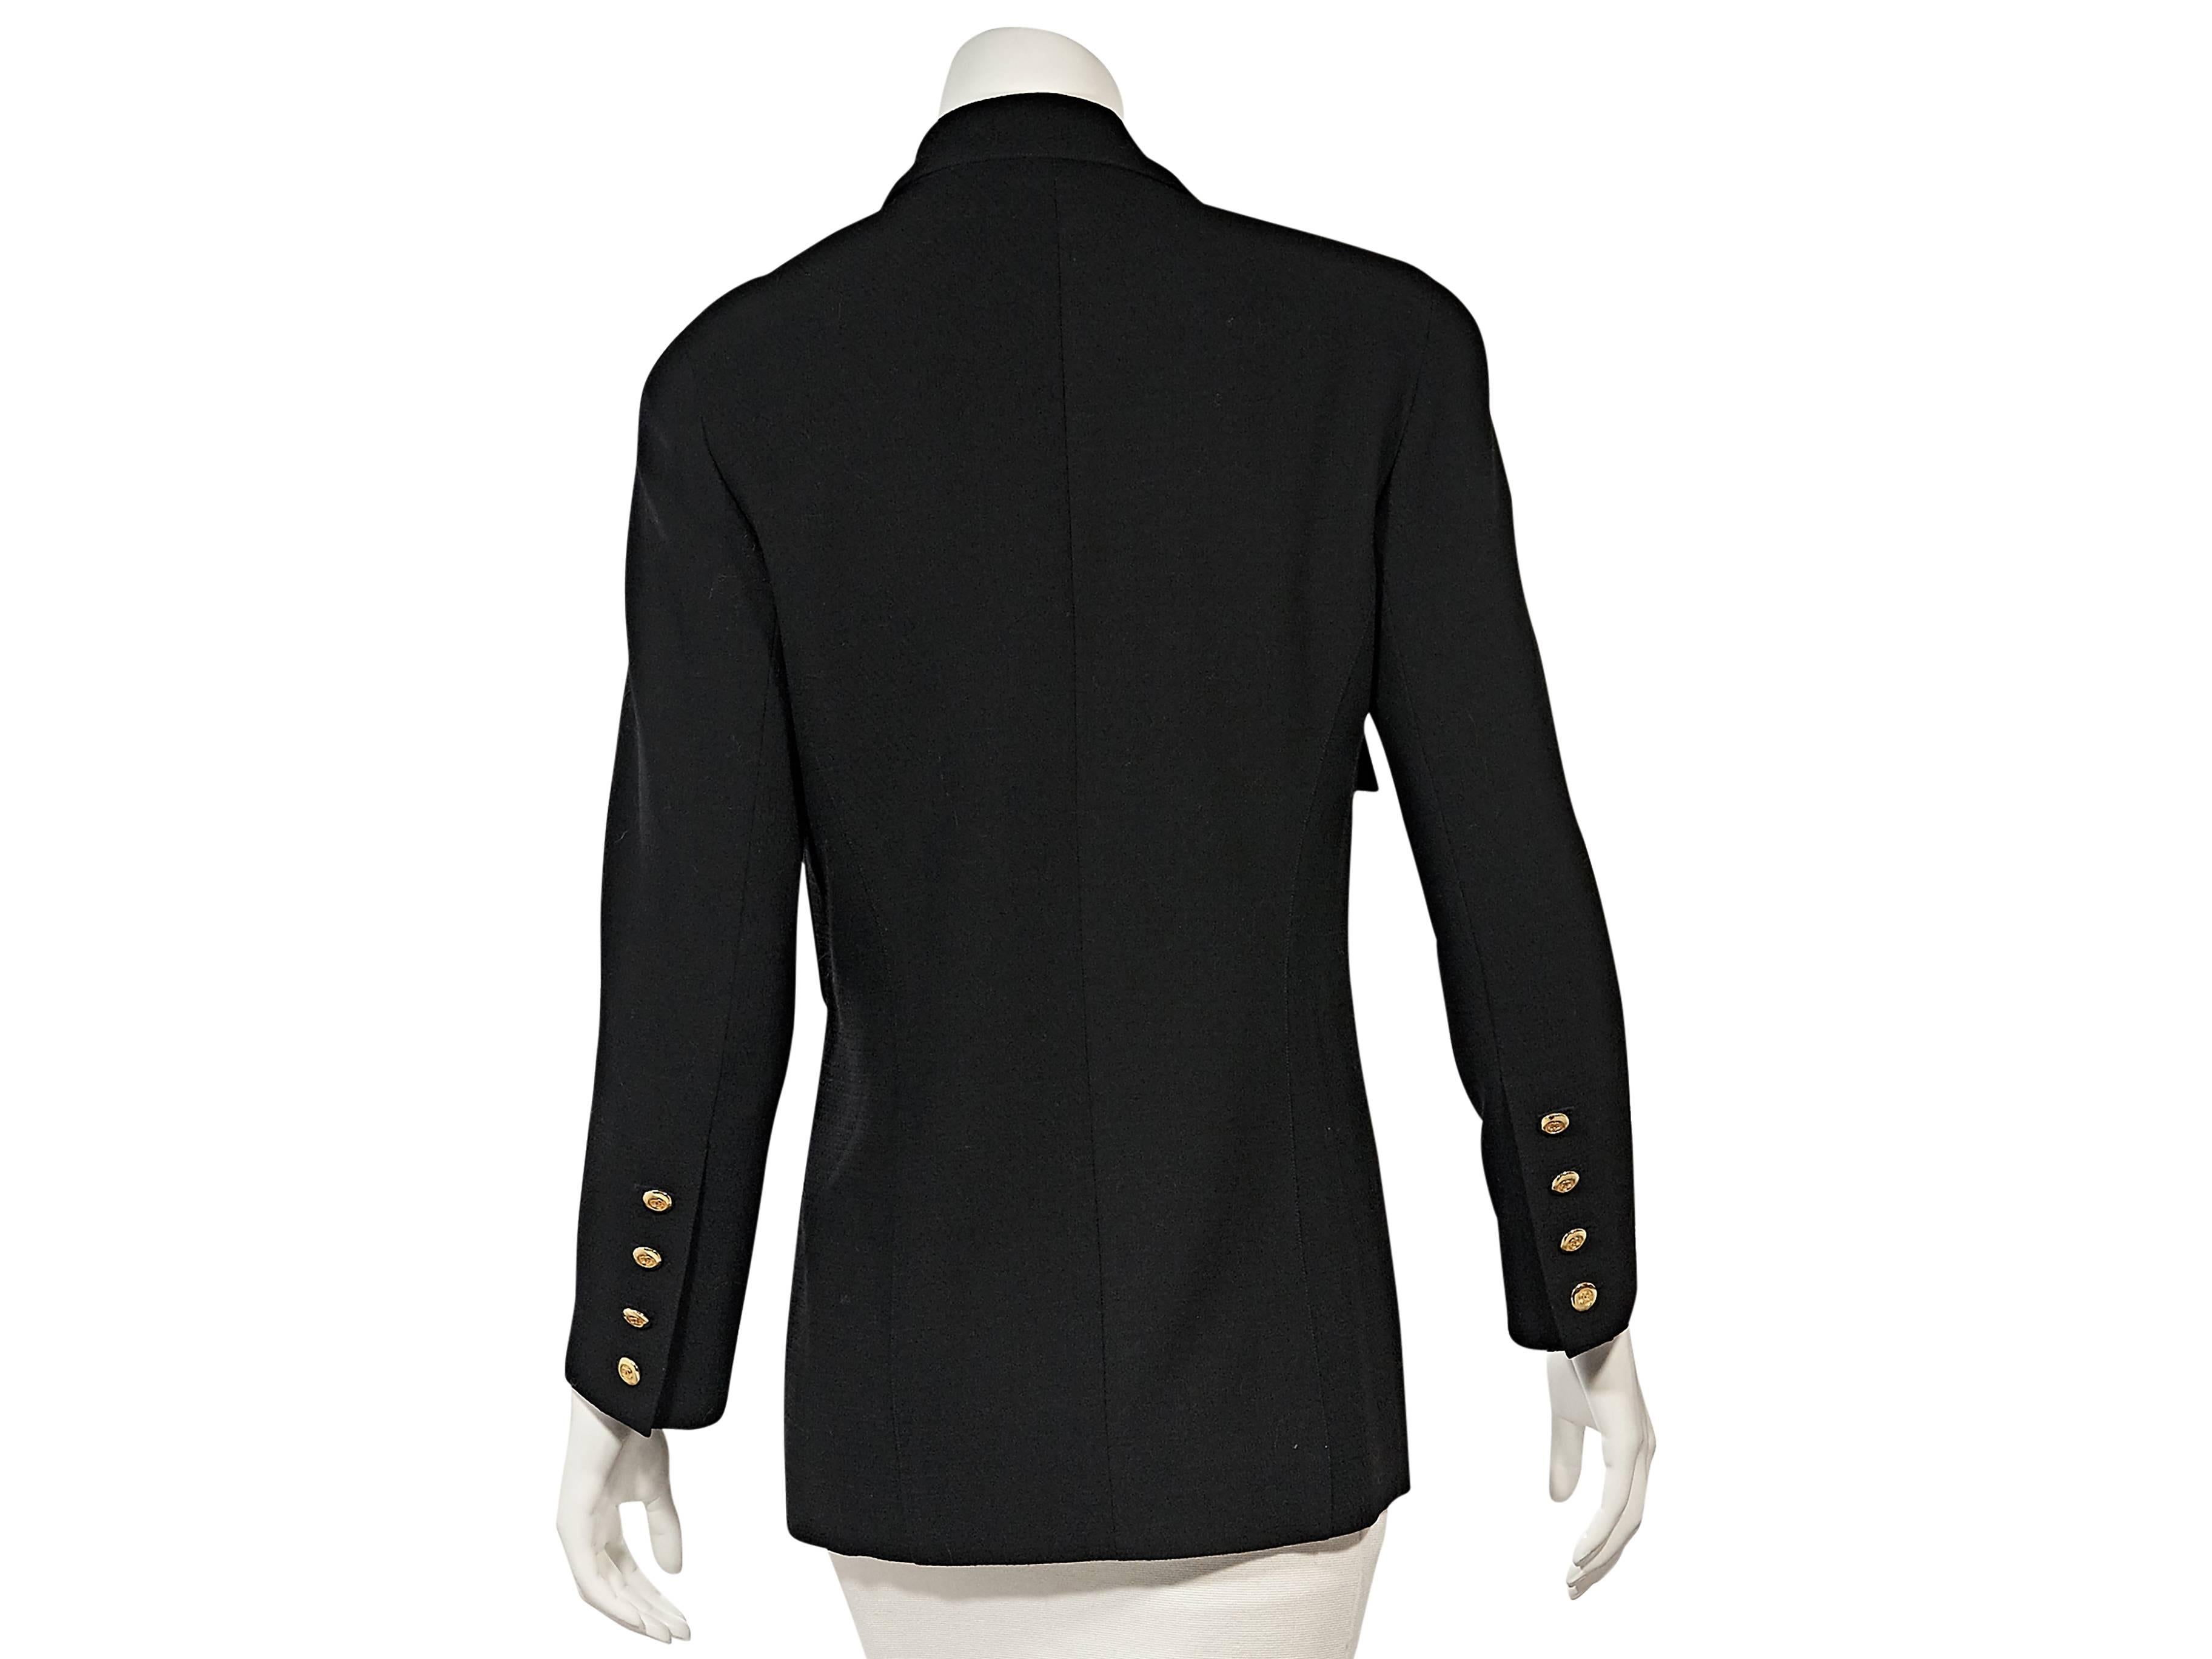 Product details: Vintage black jacket by Chanel. Peaked lapel. Long sleeves. Four-button detail at cuffs. Double-breasted button front. Chest button flap pockets. 
Condition: Very good. 